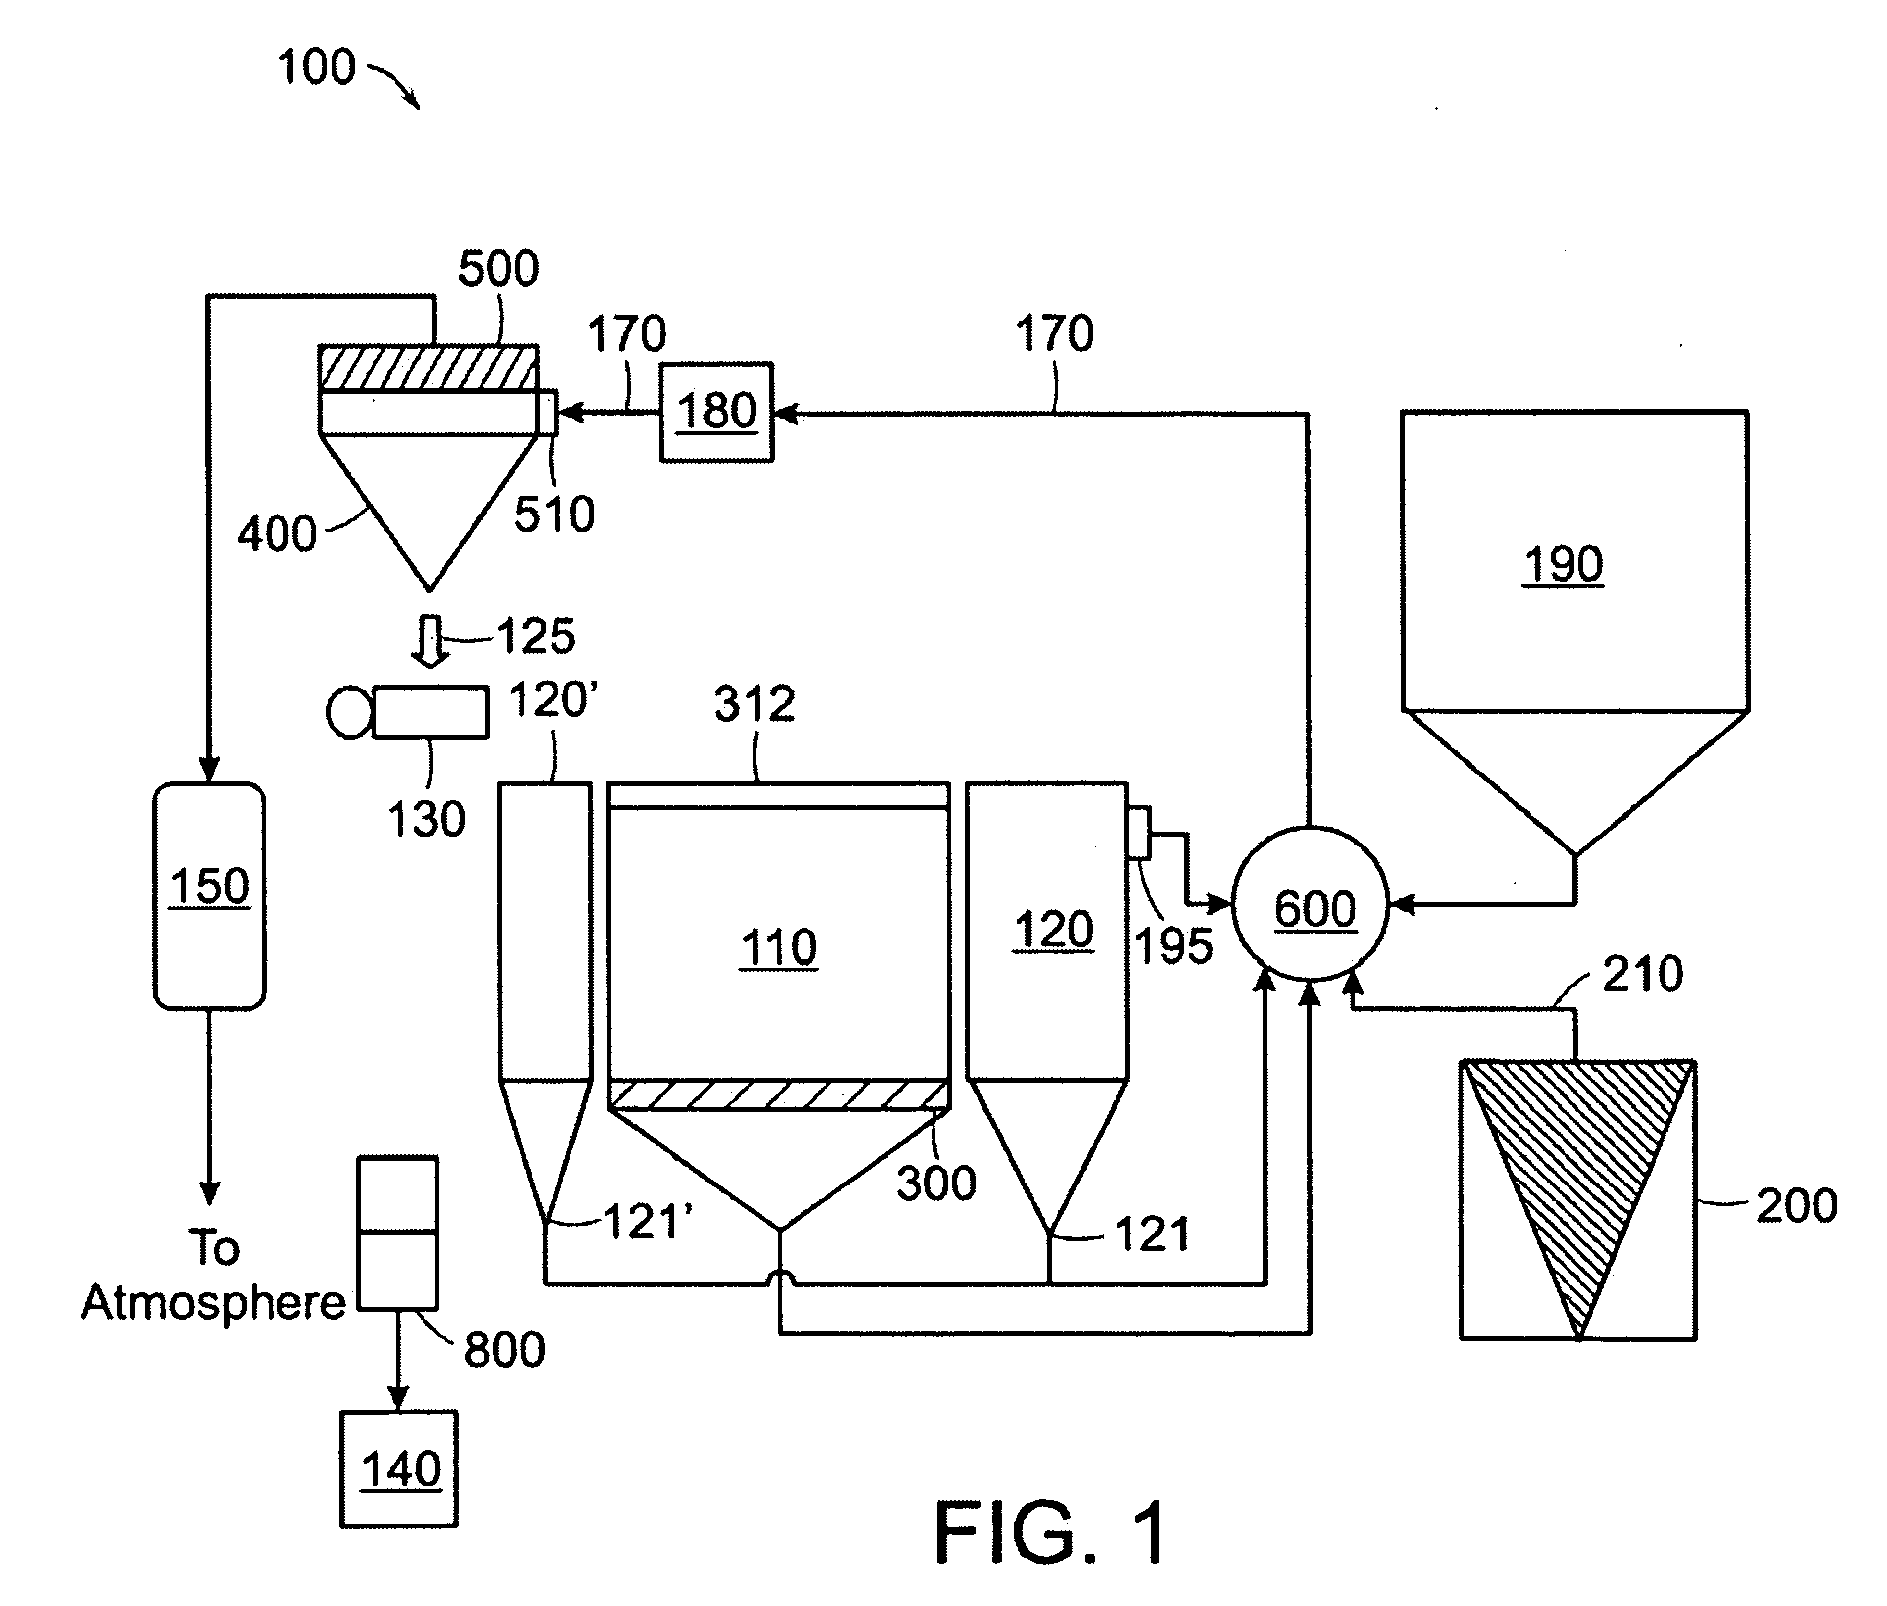 Apparatus and methods for handling materials in a 3-D printer